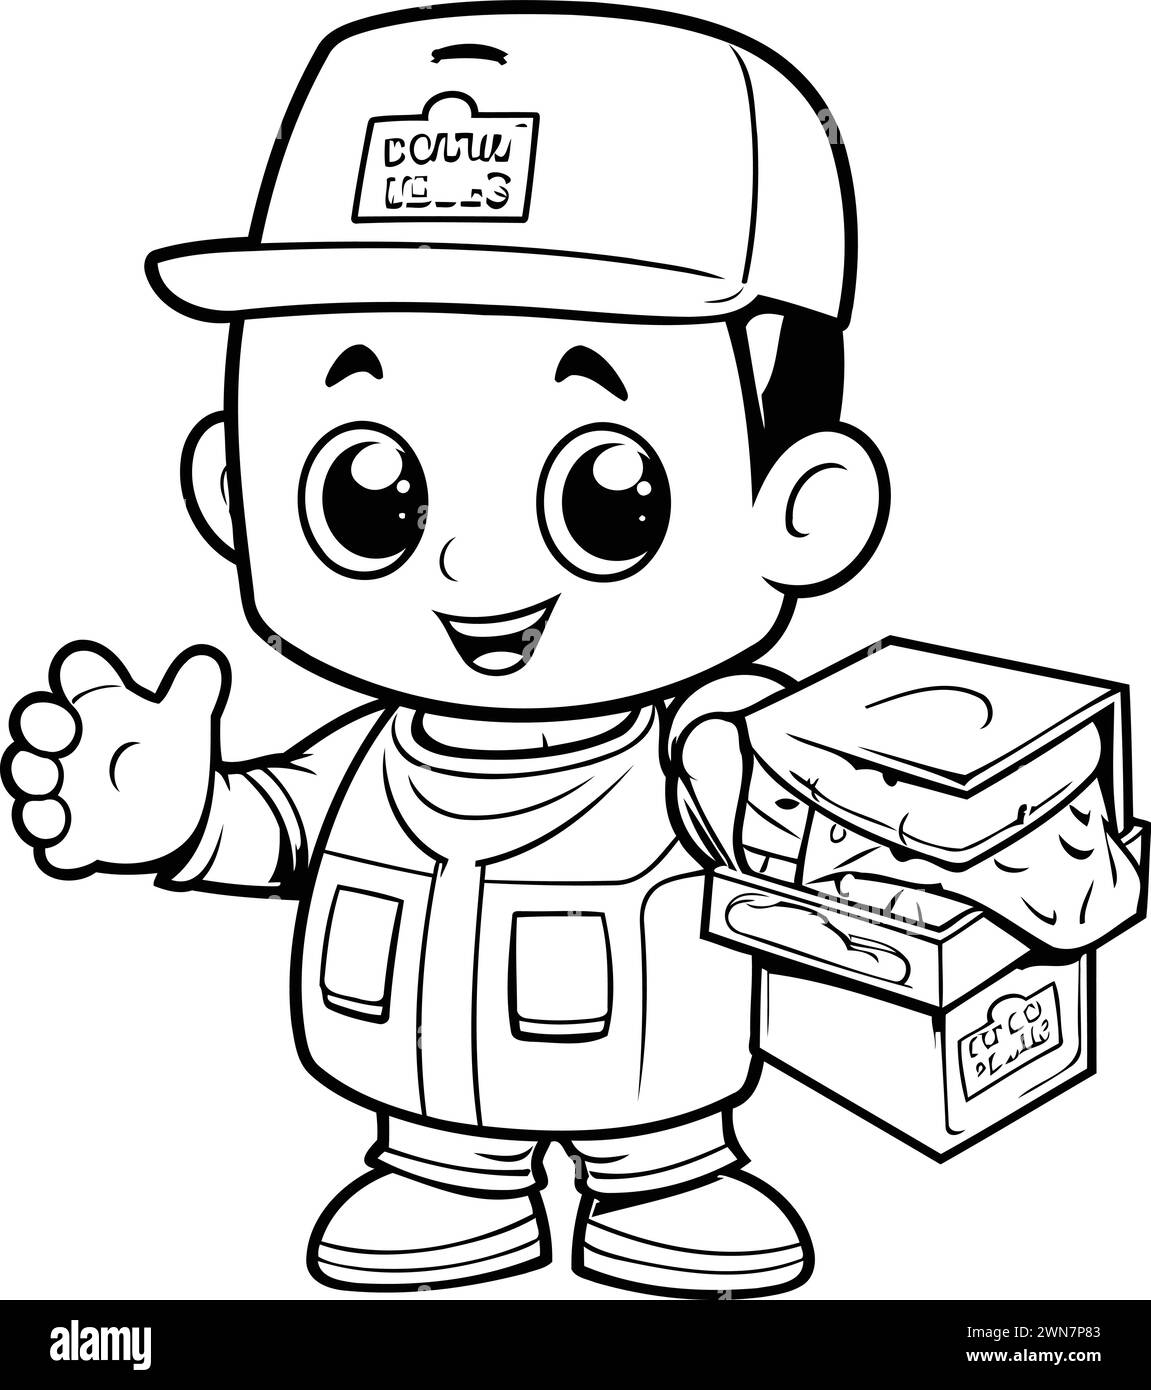 Black and White Cartoon Illustration of Cute Delivery Boy Character with Box of Food for Coloring Book Stock Vector